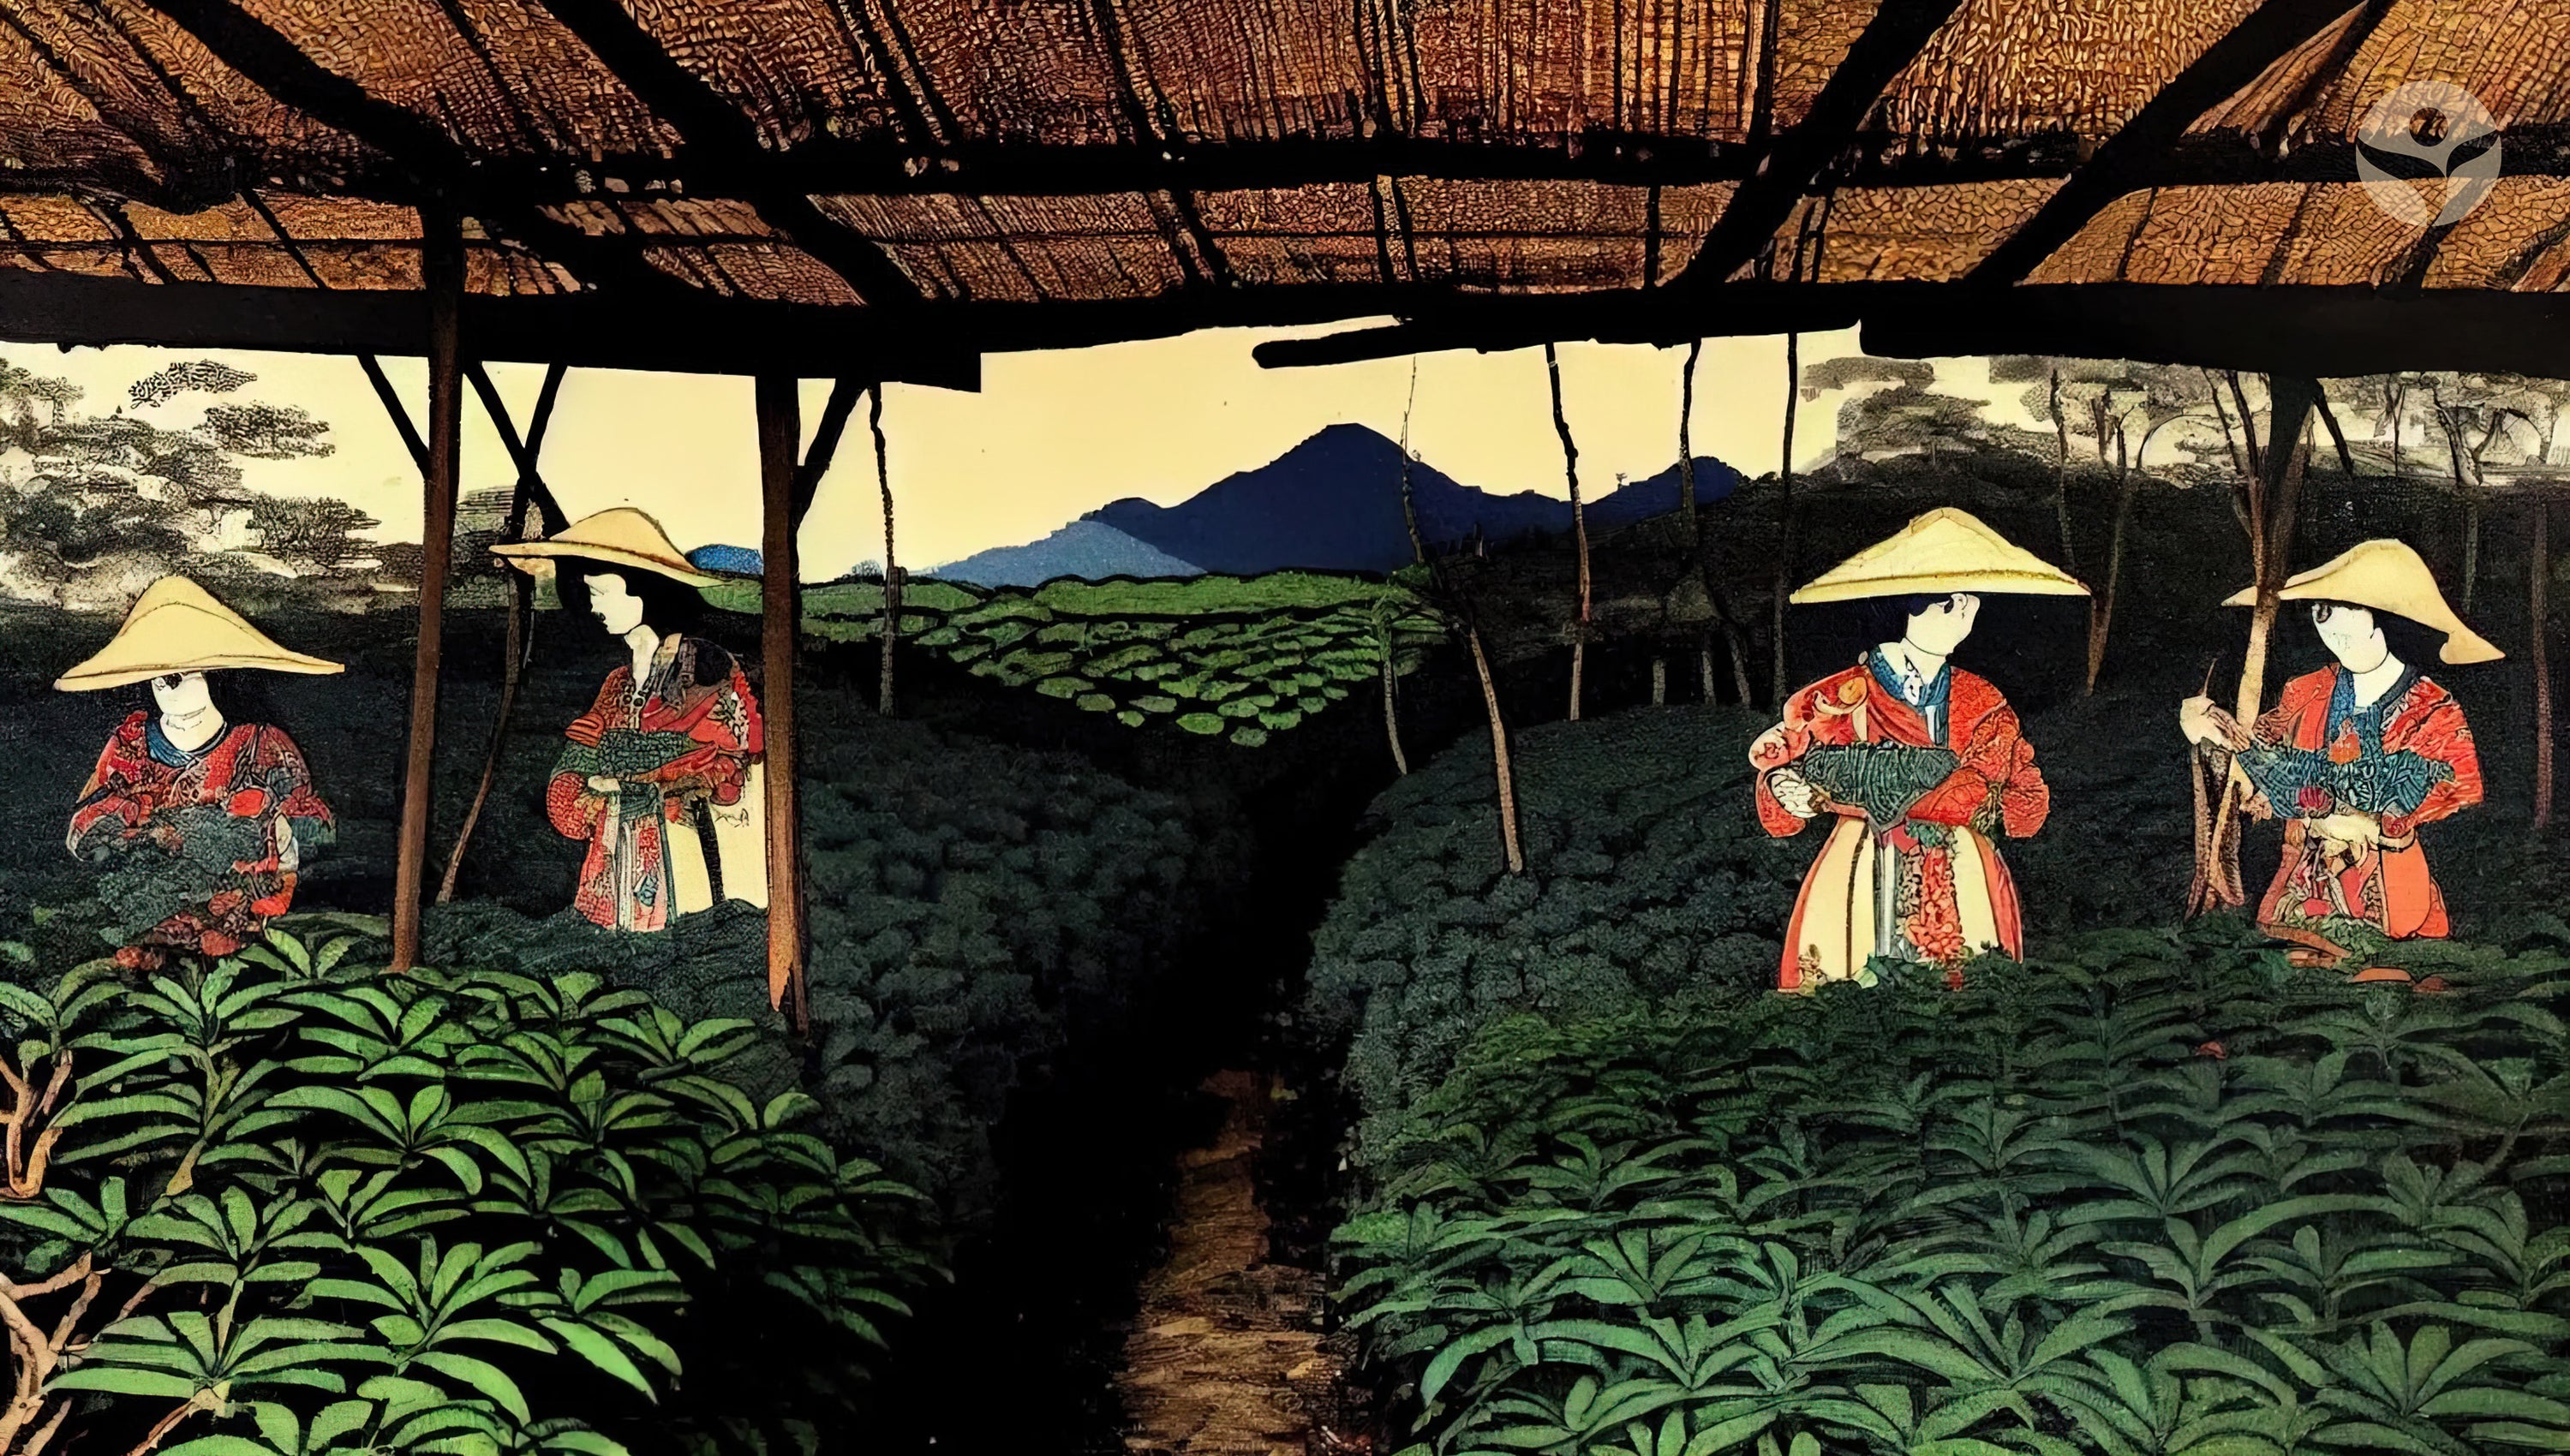 Artwork of historical tea pickers in a field under a bamboo roof